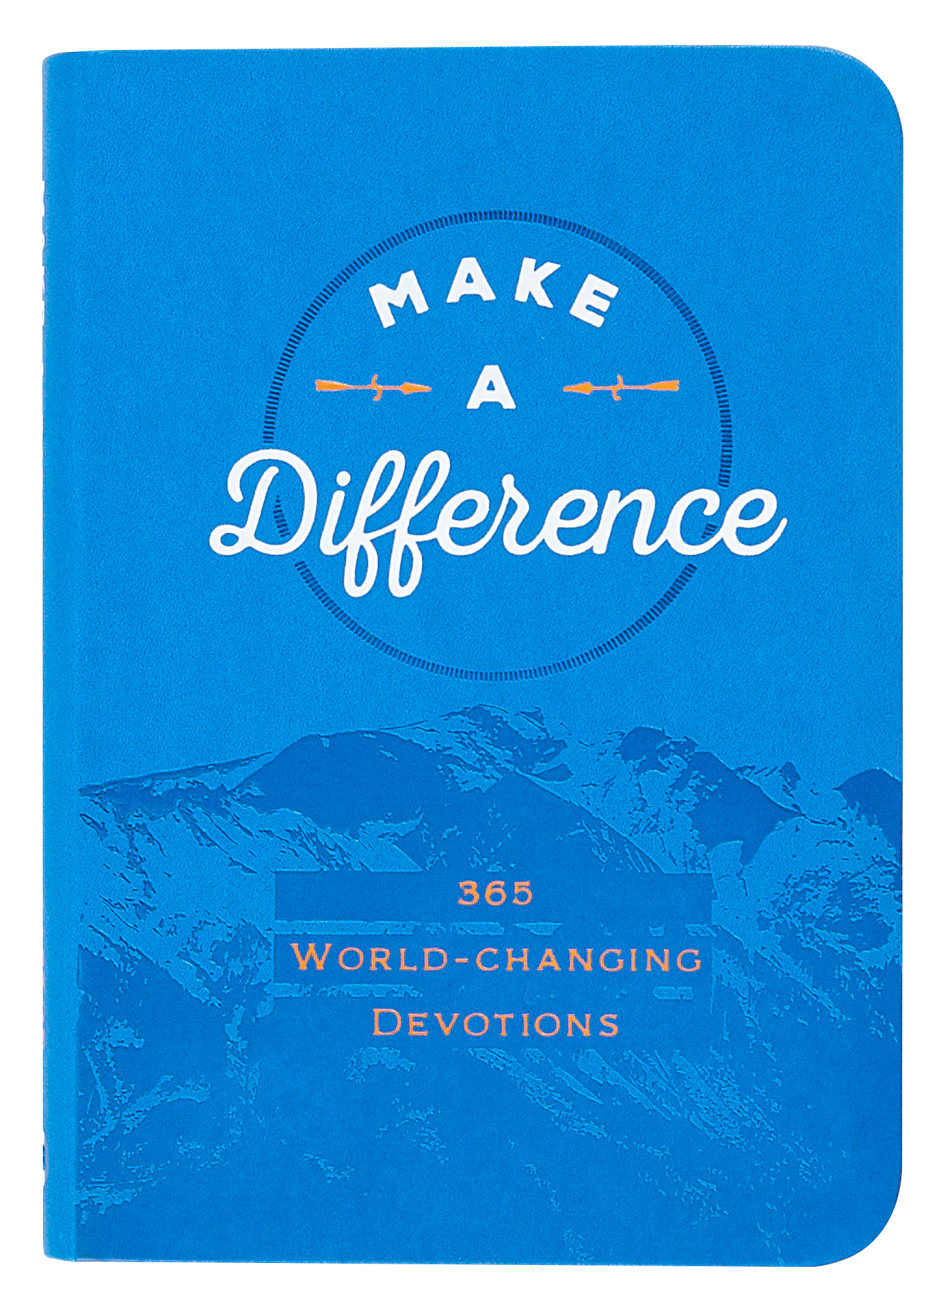 Make a Difference: 365 World-Changing Devotions Imitation Leather